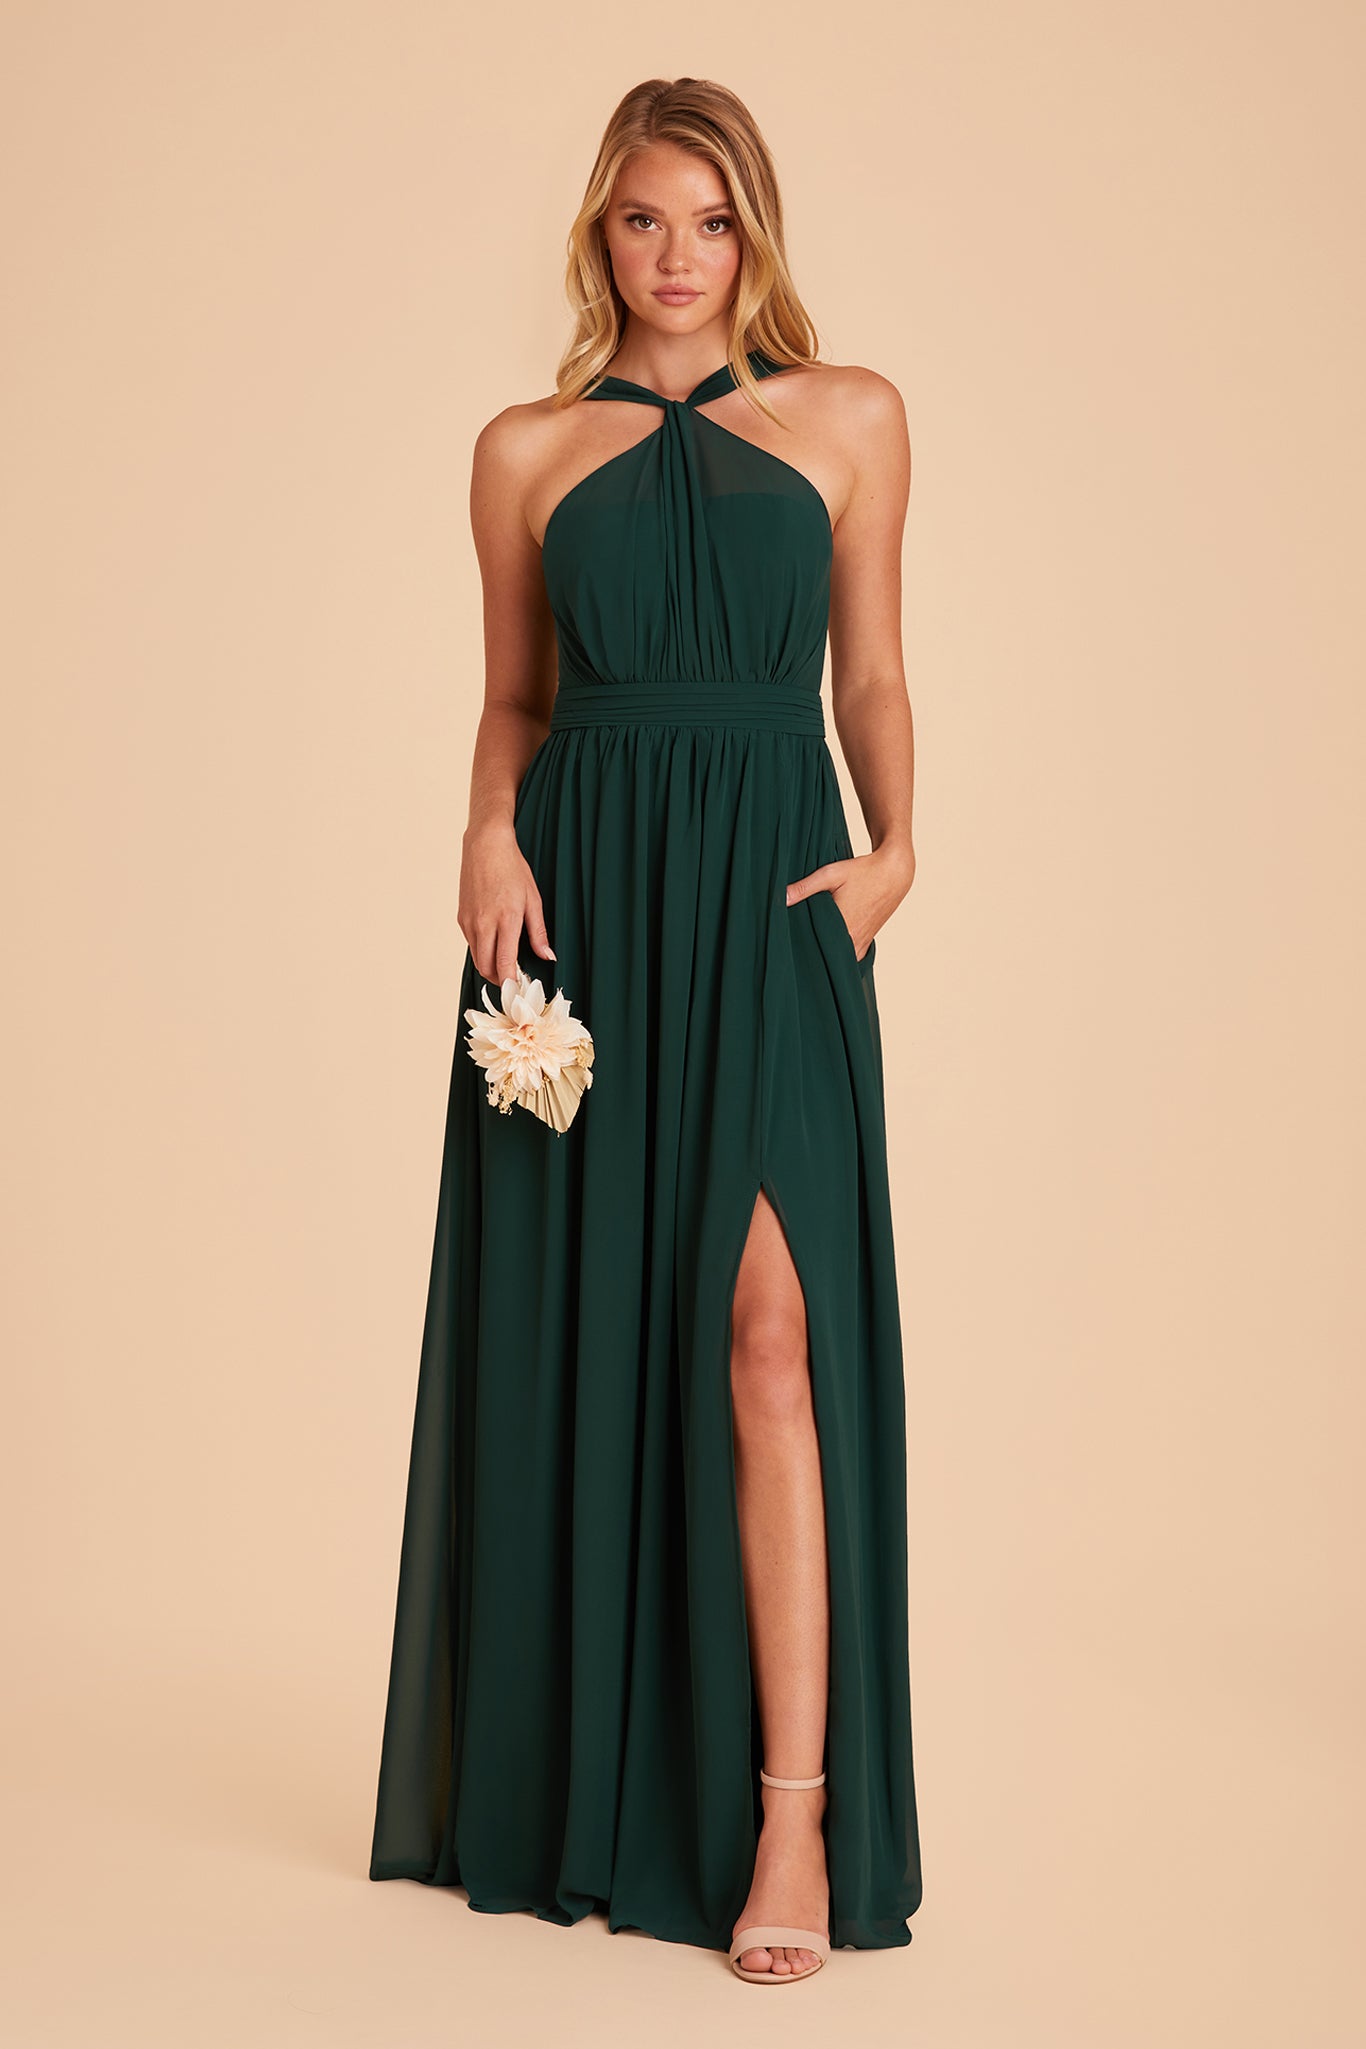 Kiko bridesmaid dress with slit in emerald chiffon by Birdy Grey, front view